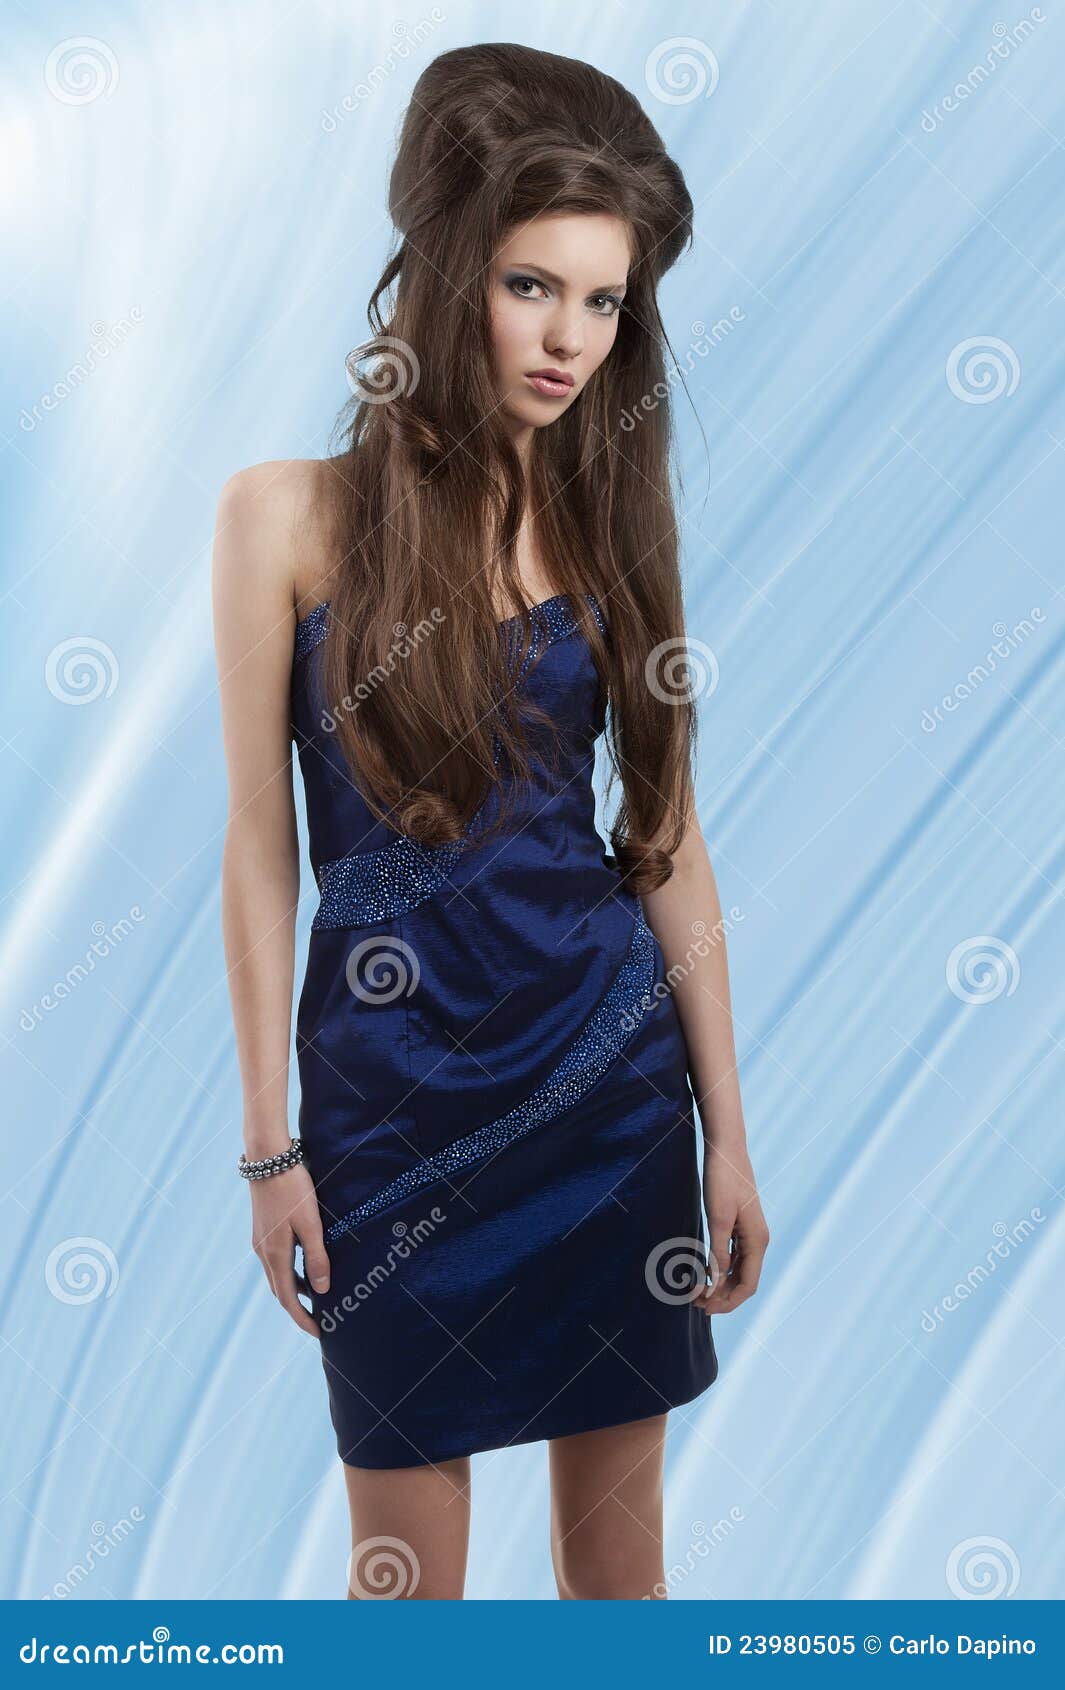 Brunette in Short Blue Dress Stock Image - Image of hair, hairstyle:  23980505